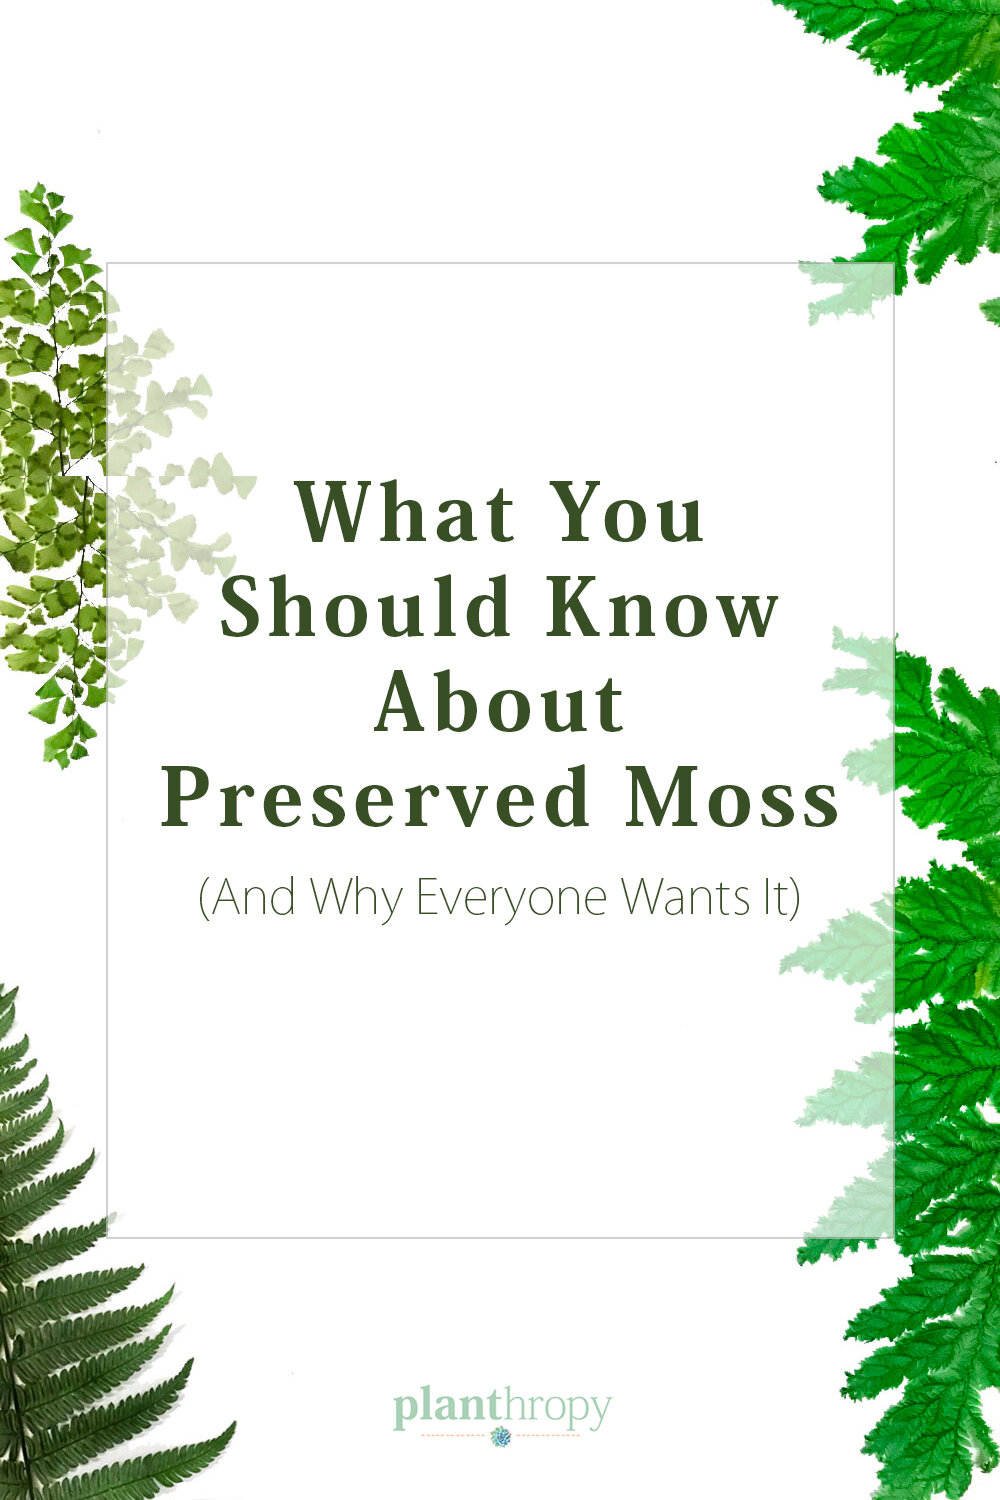 Preserved Moss: What Is It? Is It Different from Dried Ones?